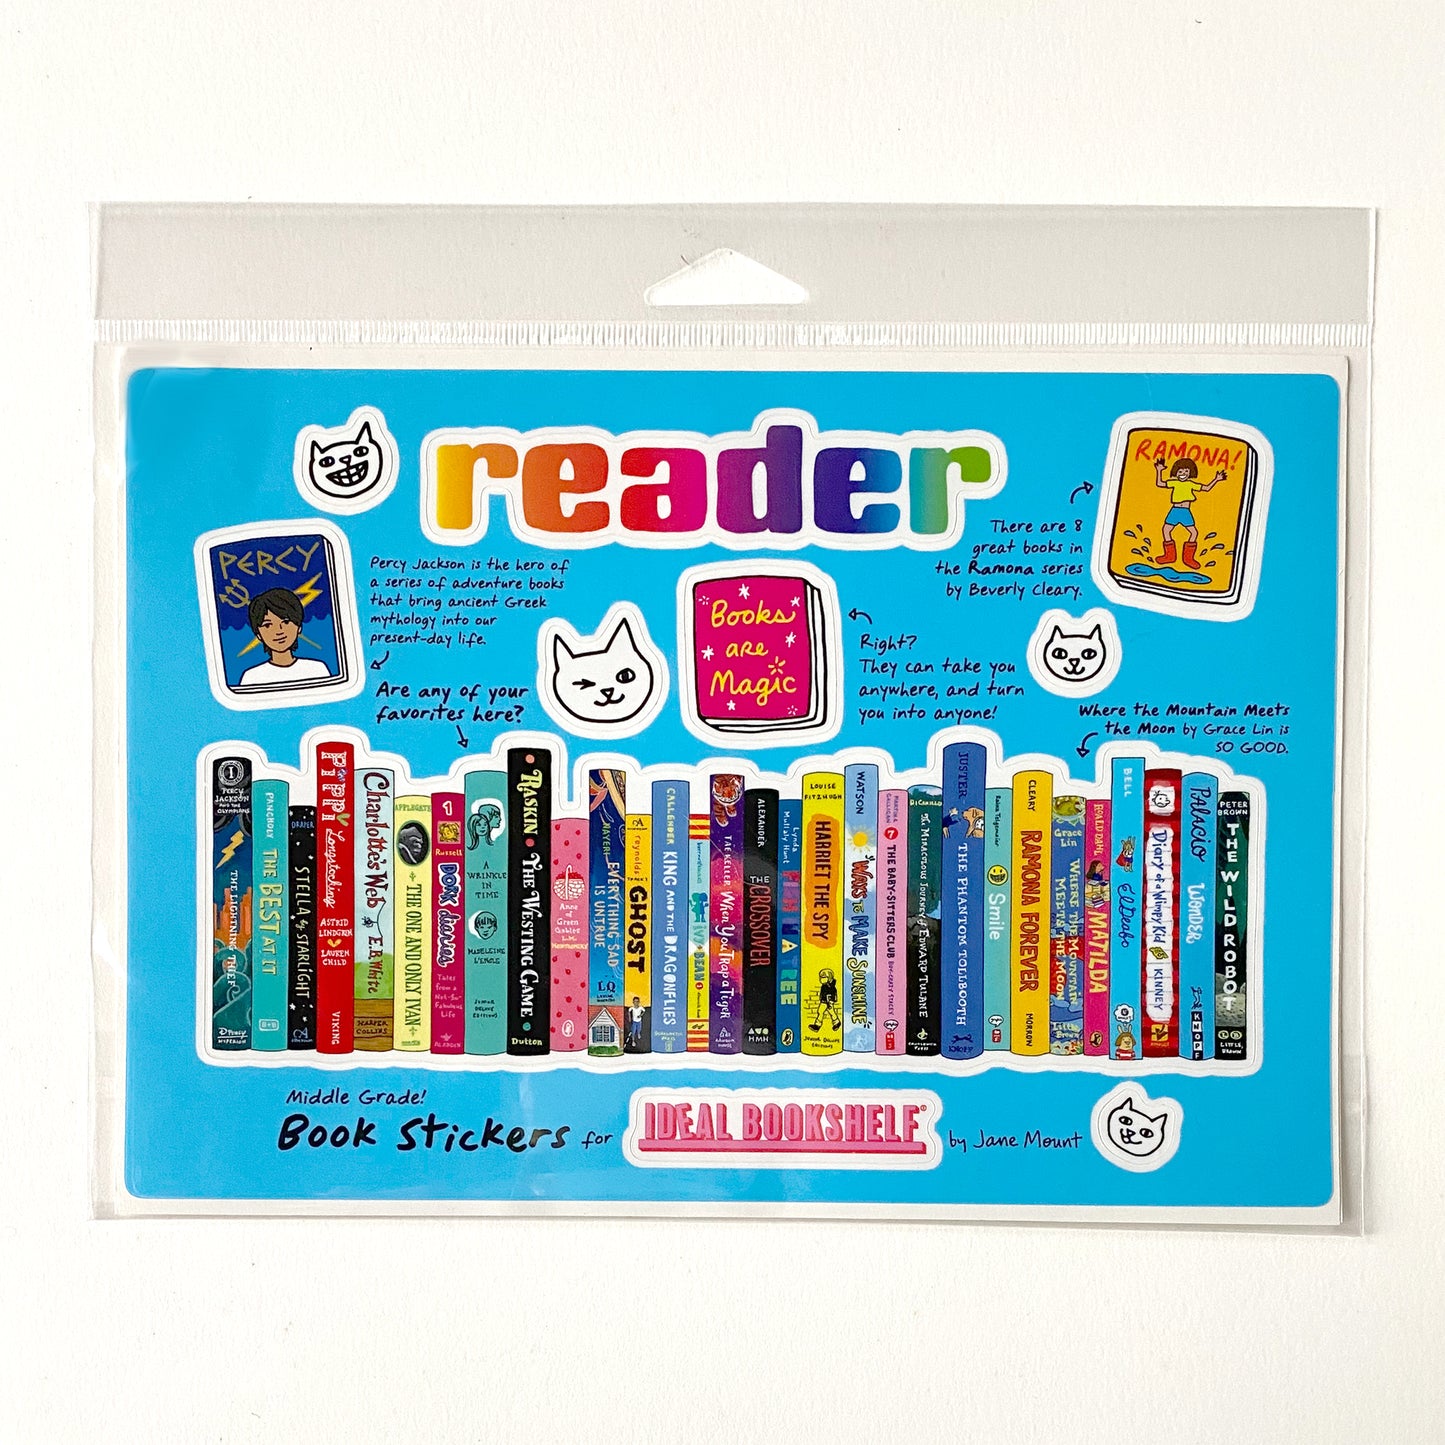 Sticker Sheets: Middle Grade!